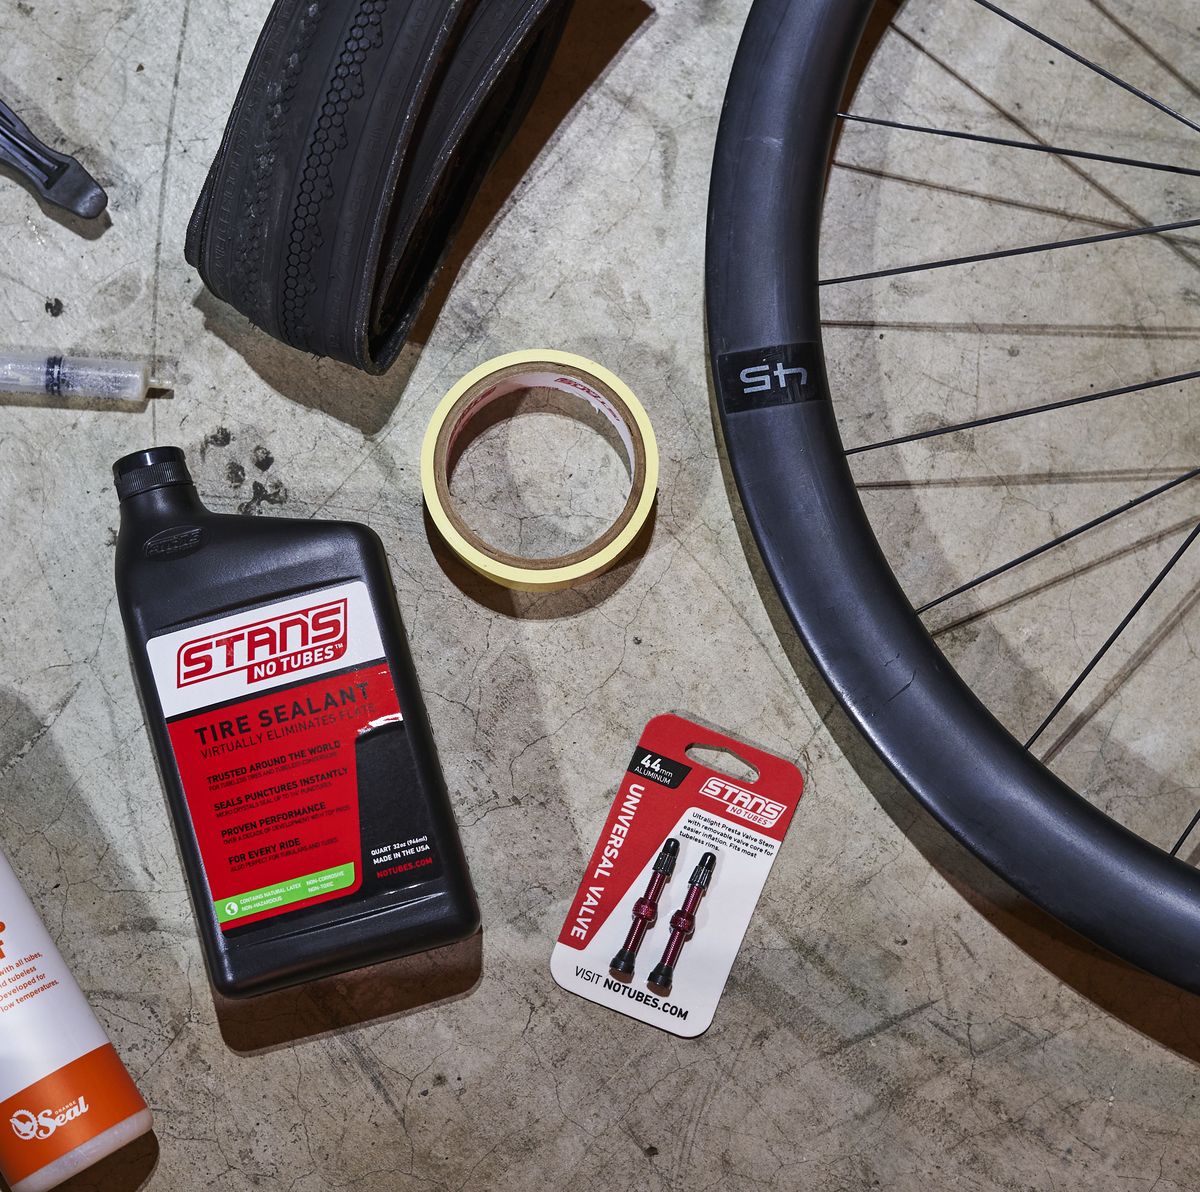 How to Install Tubeless Tires